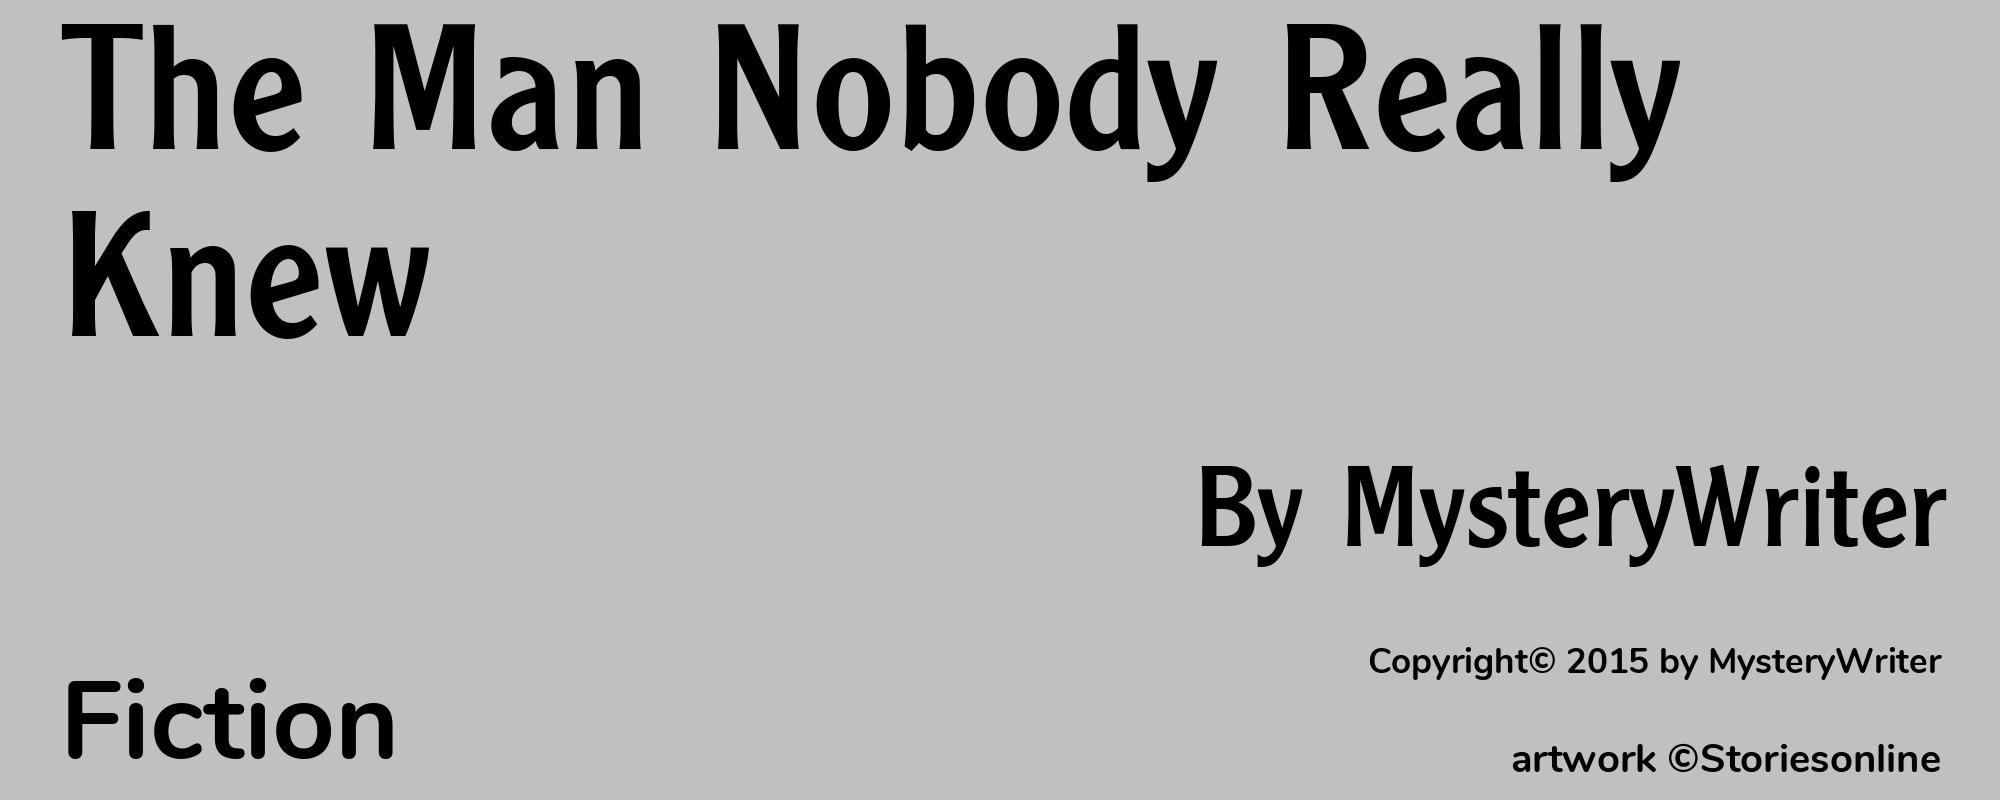 The Man Nobody Really Knew - Cover